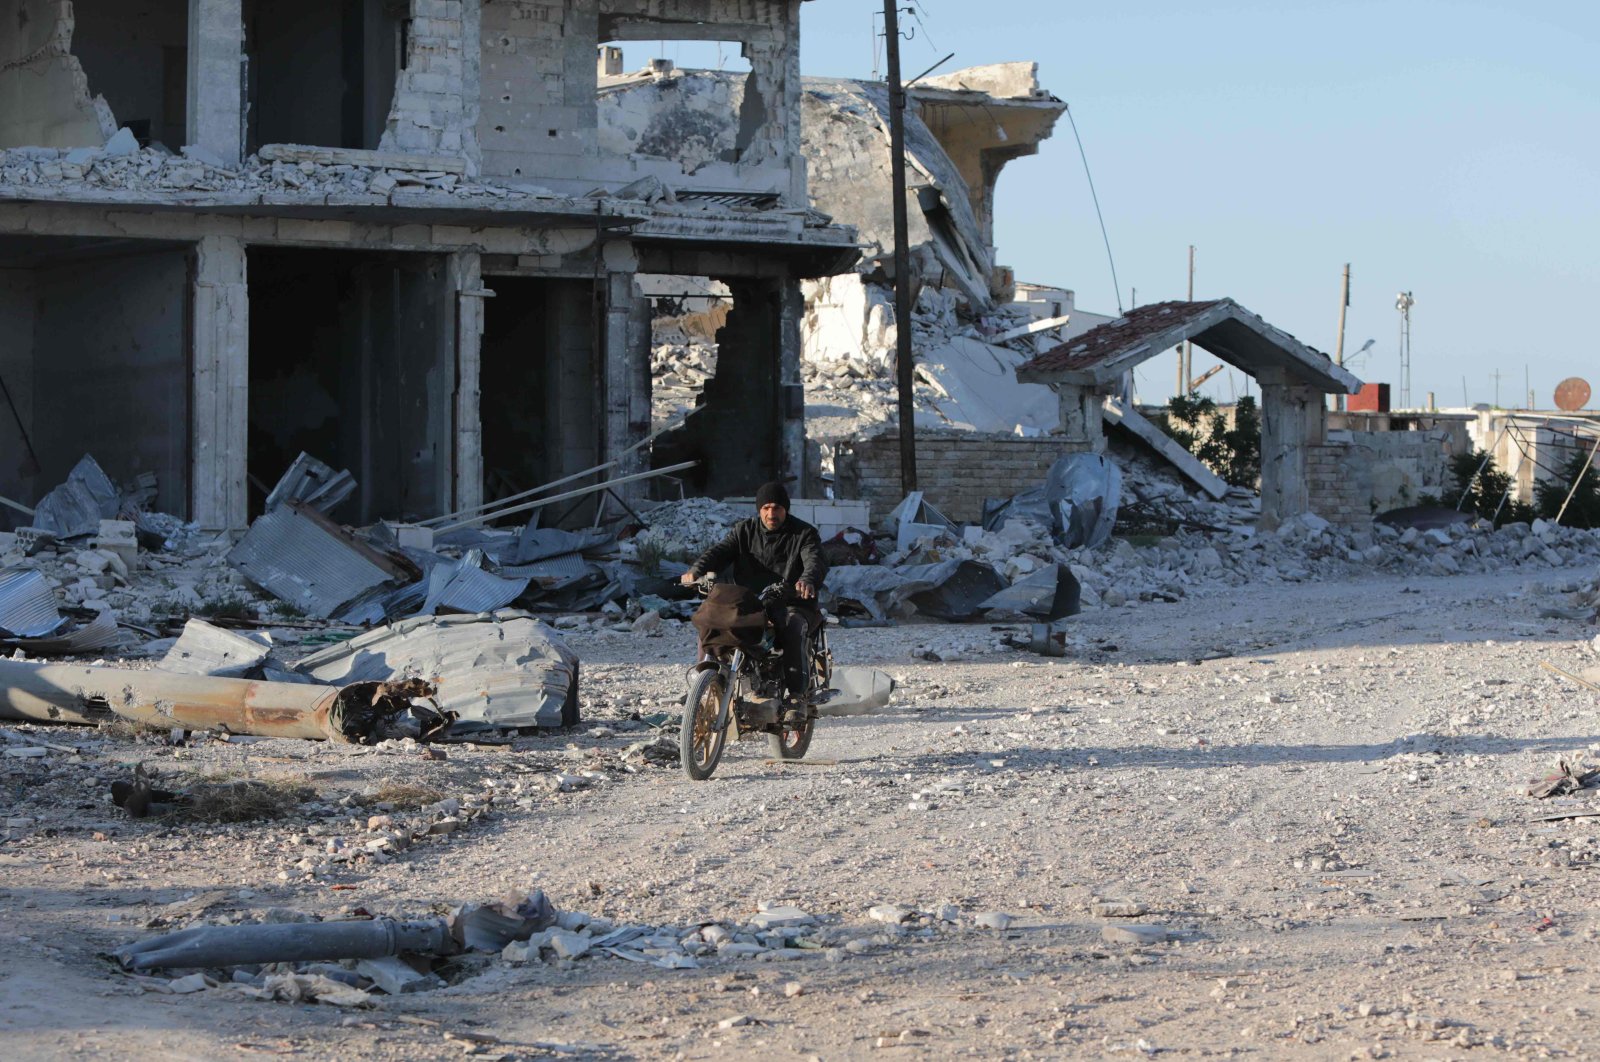 A Syrian man rides his motorcycle in al-Nayrab, a town ravaged by pro-regime forces' bombardment near the M4 strategic highway, Idlib, northwestern Syria, May 6, 2020.